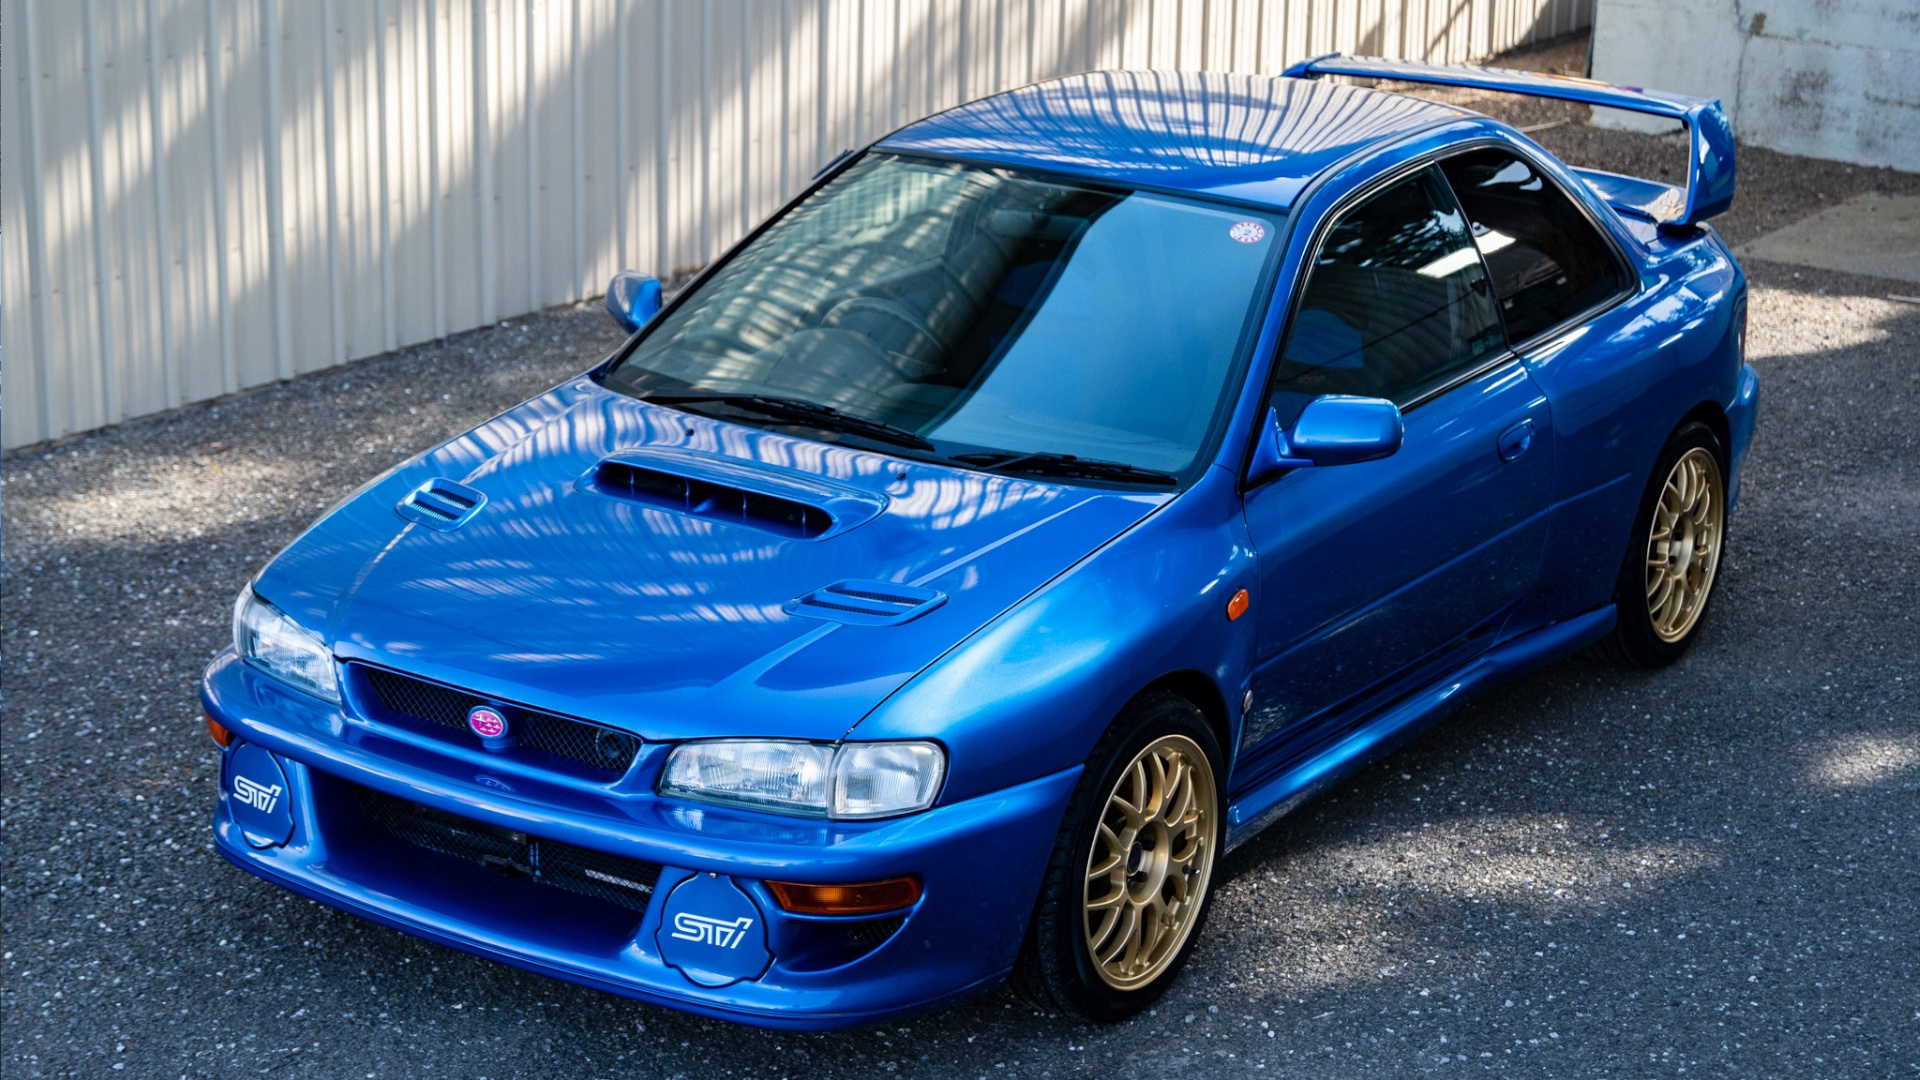 The Subaru Impreza 22B is Now Legal in the US, But It’s Still Expensive